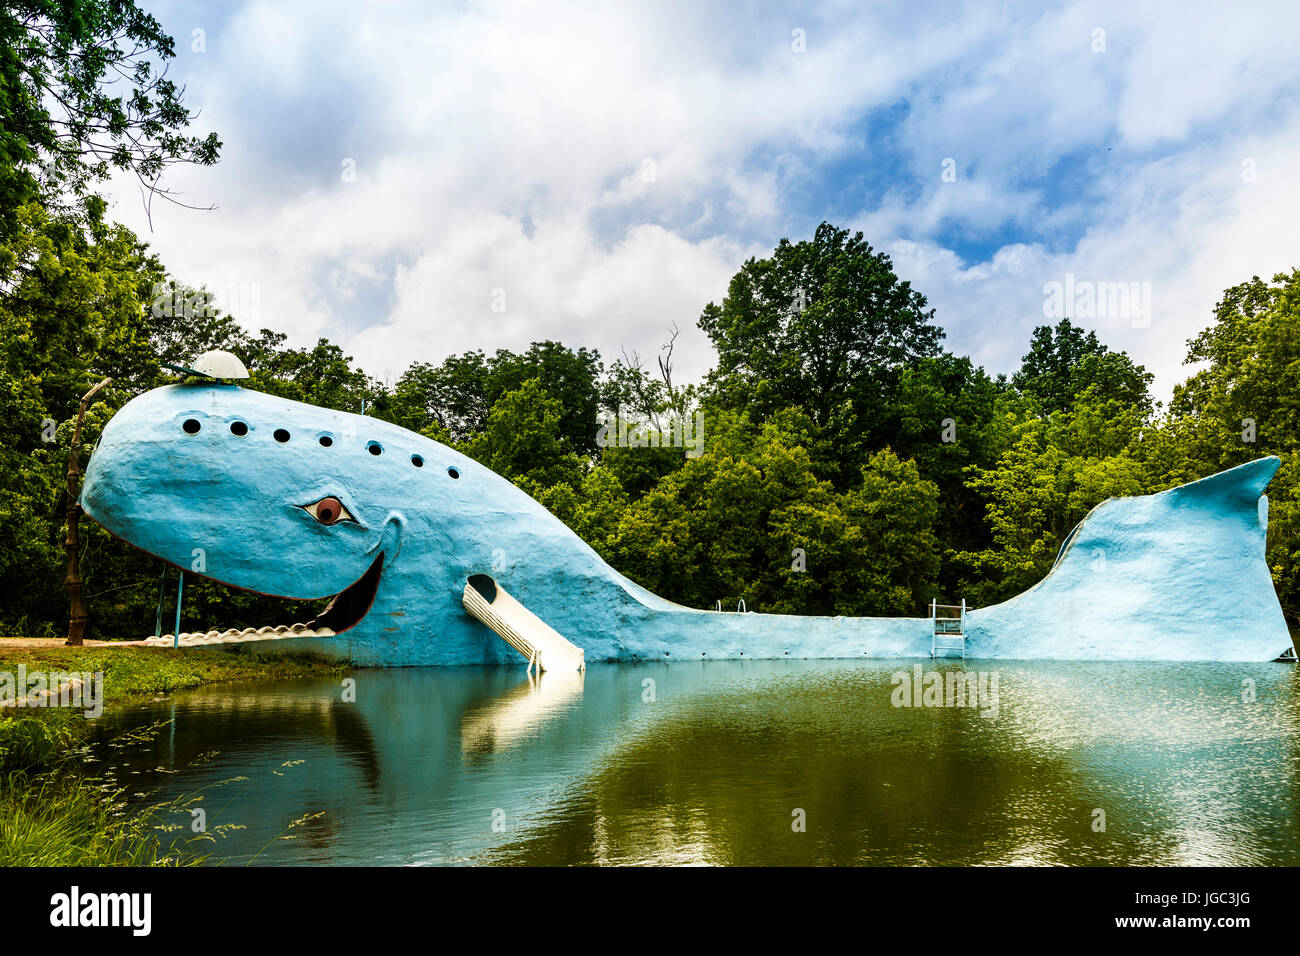 The Blue Whale, Catoosa, Historic Route 66, Oklahoma Stock Photo